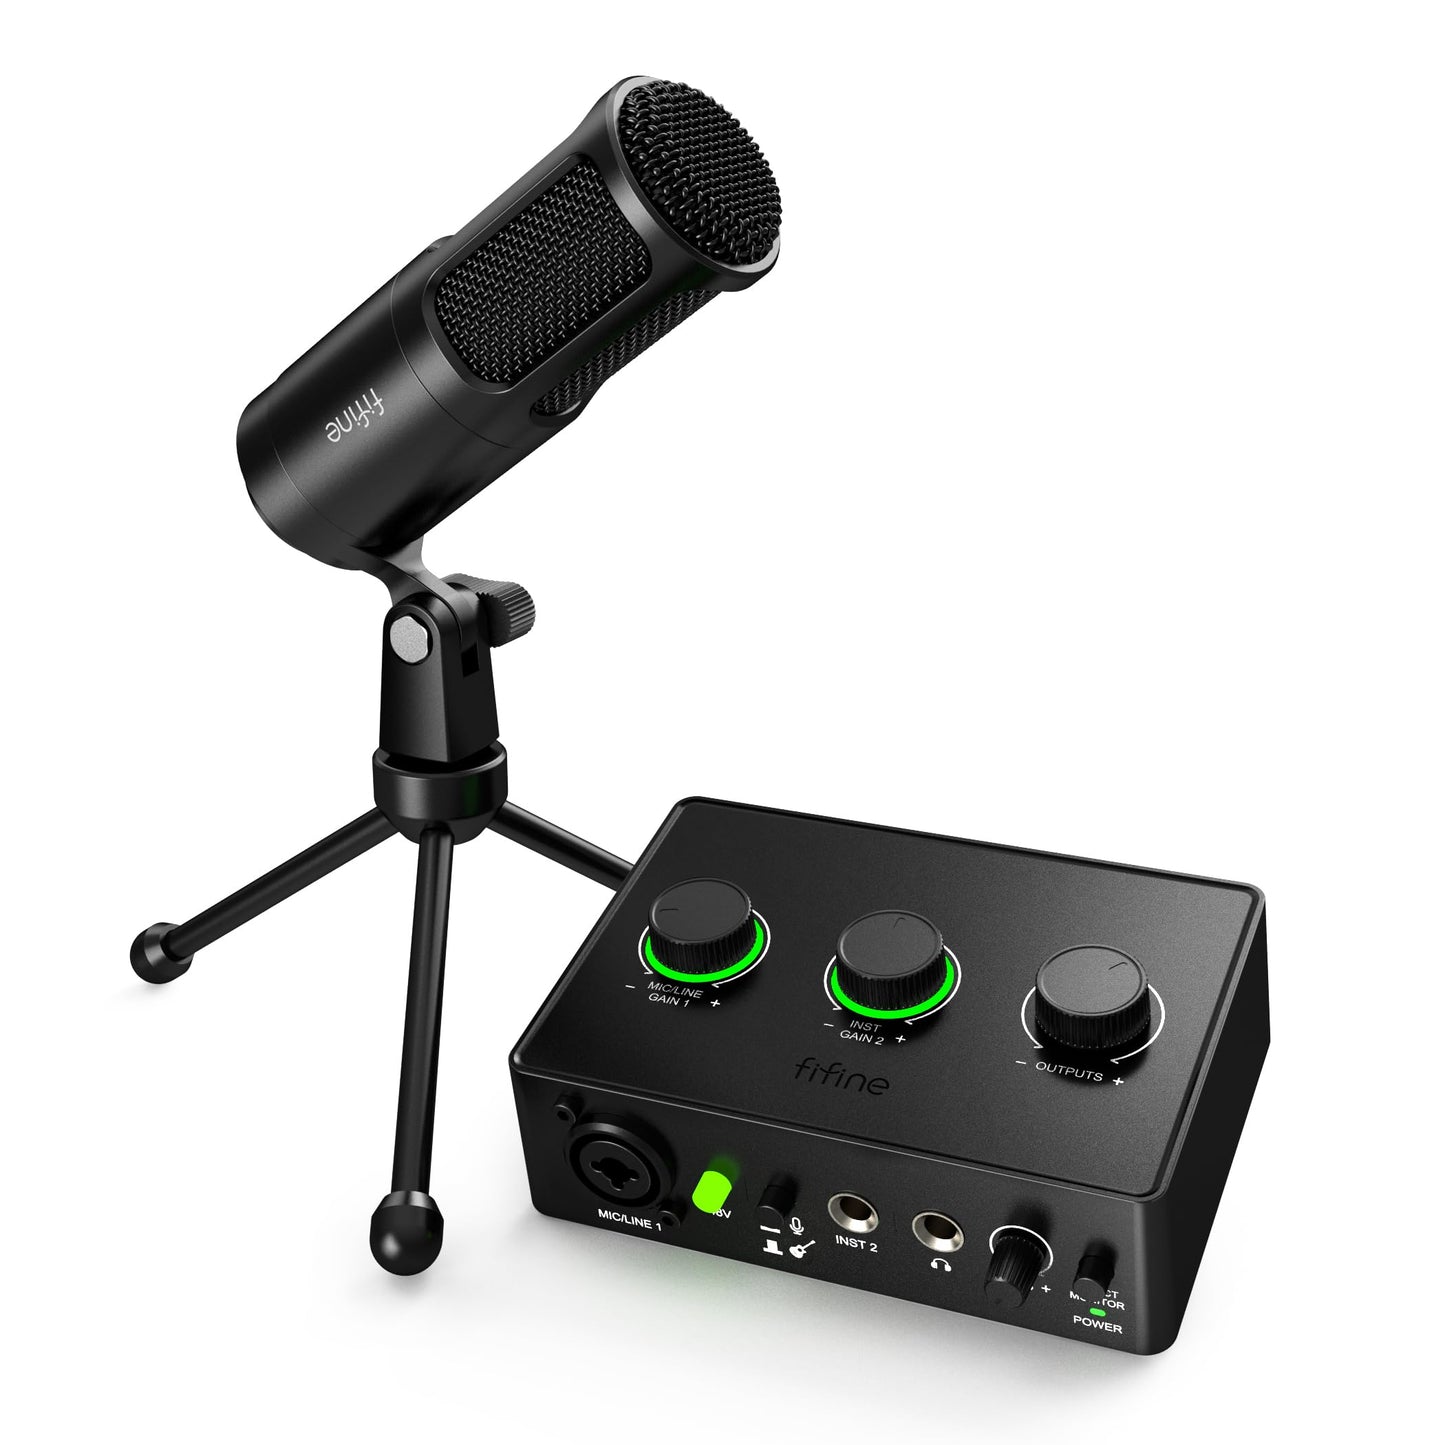 FIFINE Recording PC Mixer and XLR Dynamic Microphone Set,Podcast Audio Interface with 48V Phantom Power,Gain Knob Kit,Vocal Microphone with Sleek Metal Durable Grille for Dubbing(Ampli1+K669D)